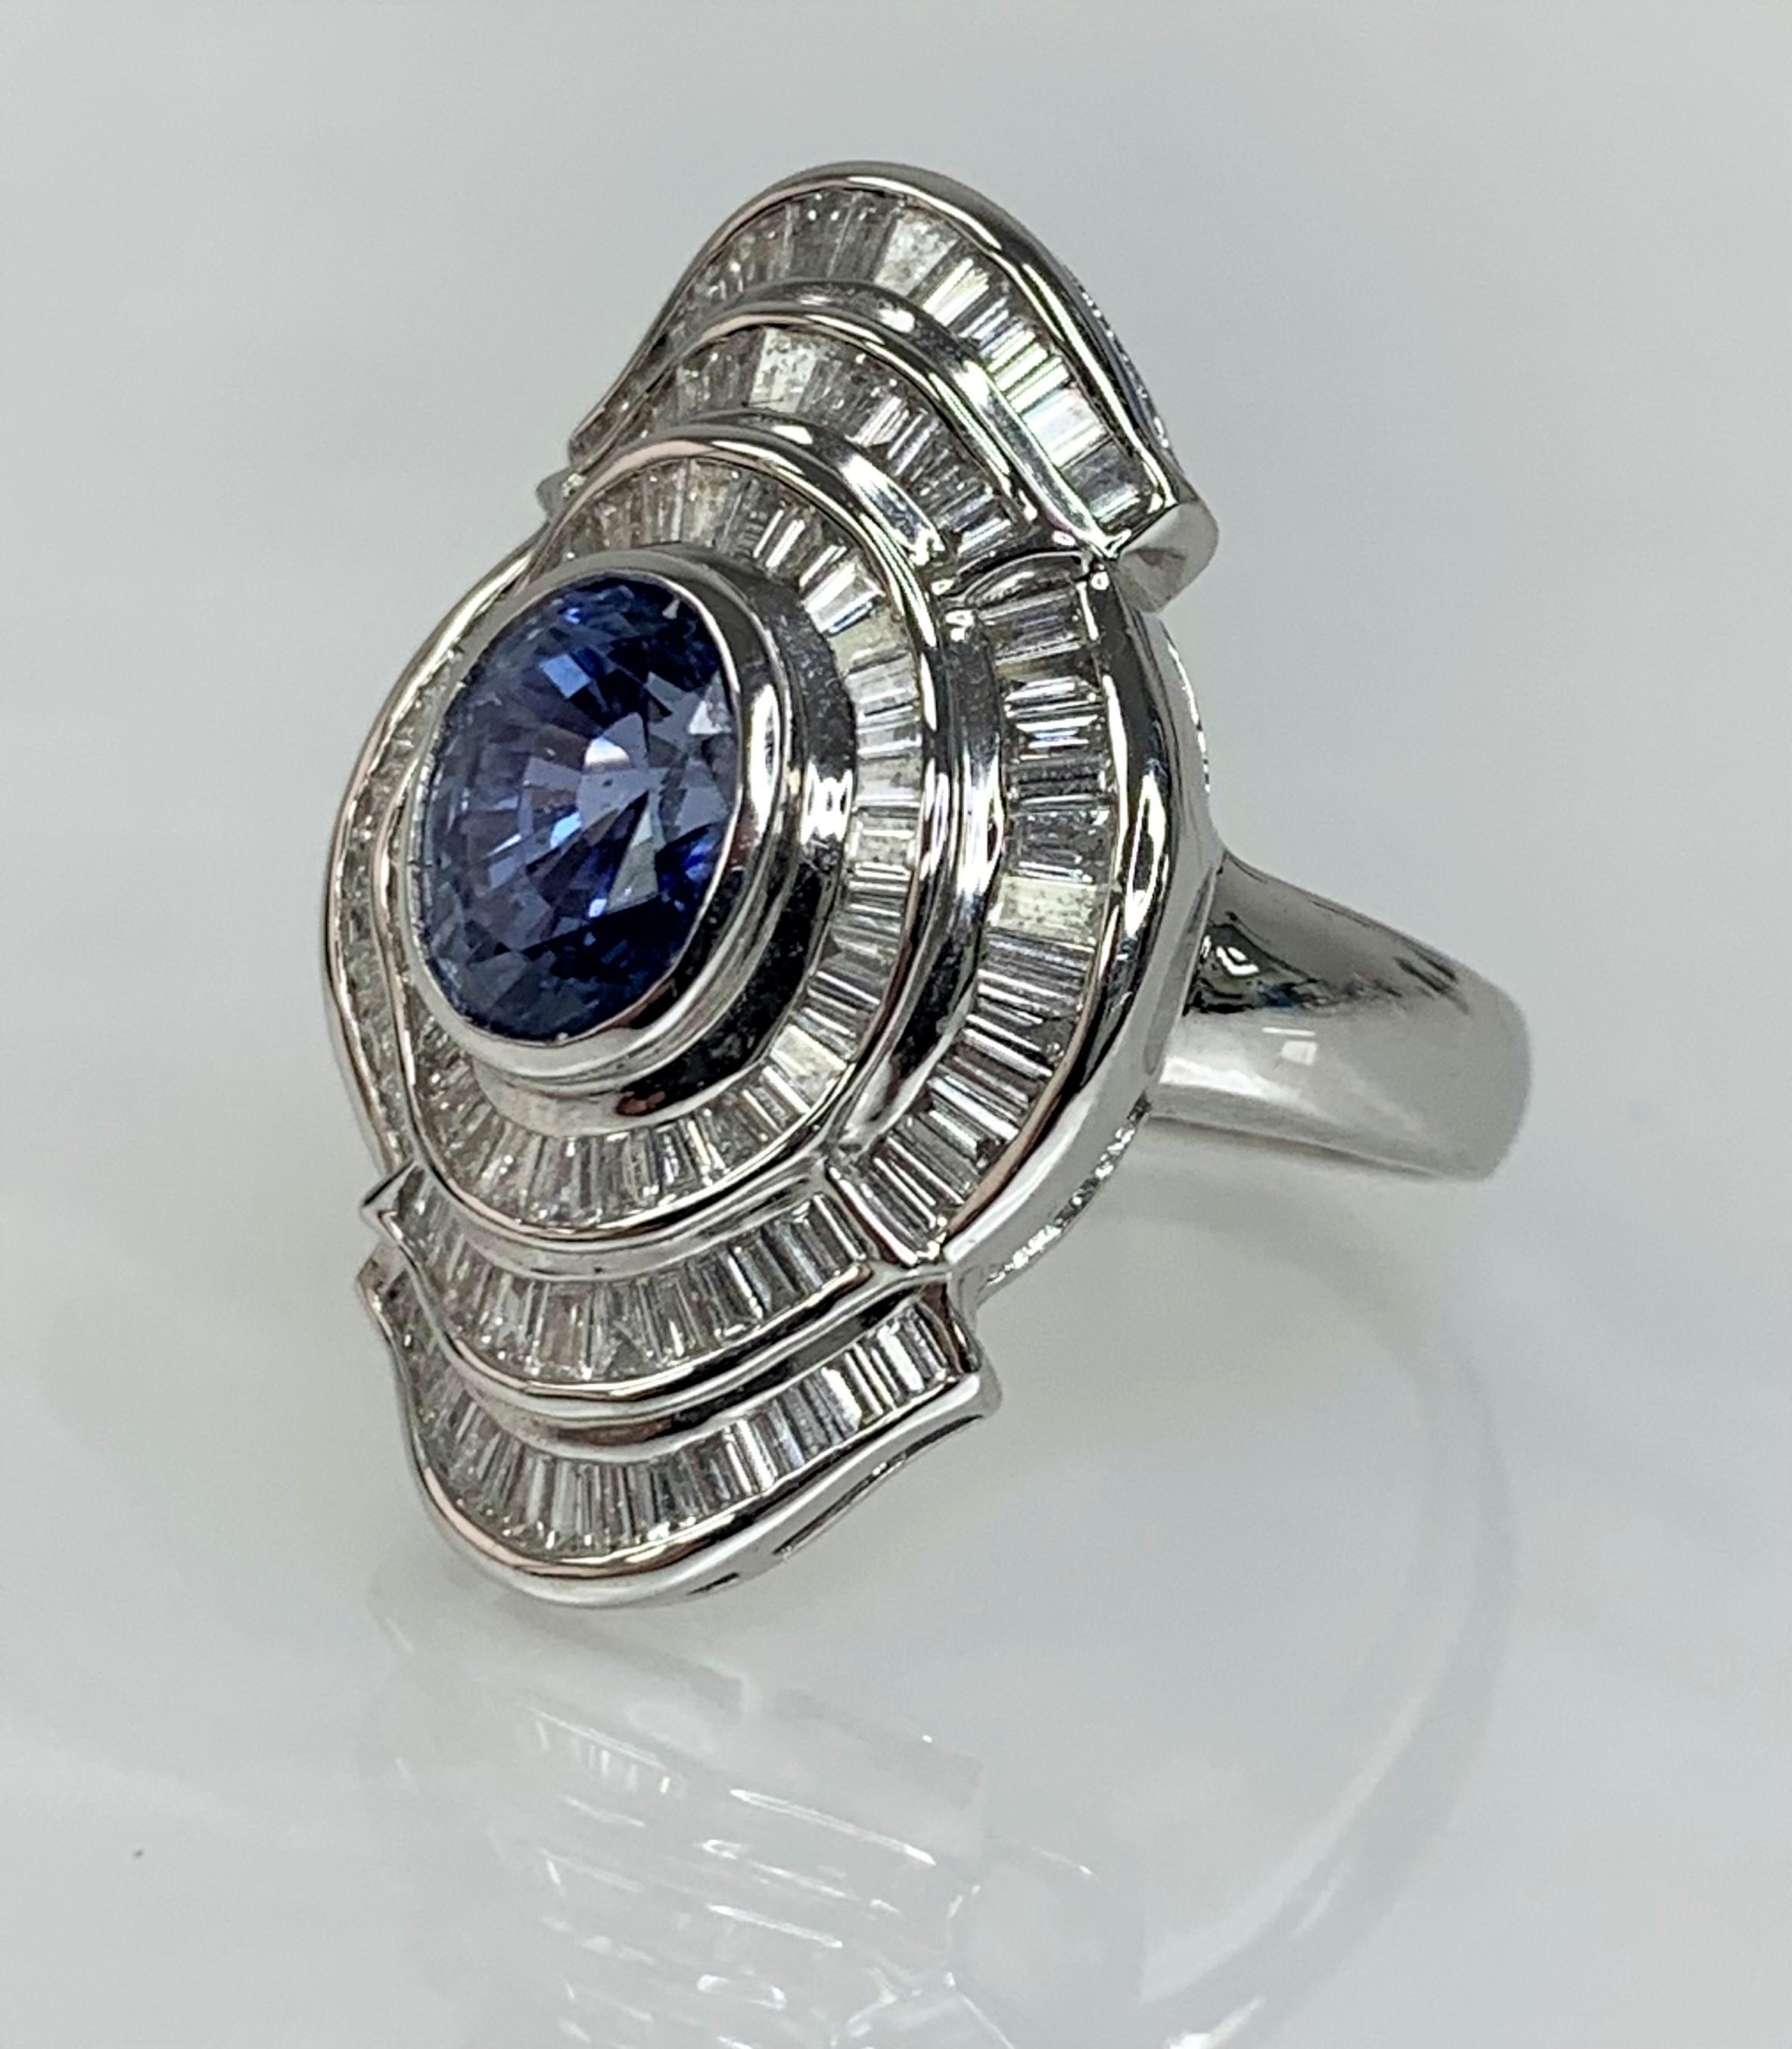 An eye-catching vintage blue sapphire ring featuring a vibrant pastel colored center stone weighing 3.26 carats secured by a bezel setting while uniquely surrounded by 3 rows of sparkling white baguette diamonds weighing 1.85 carats set in solid 18K